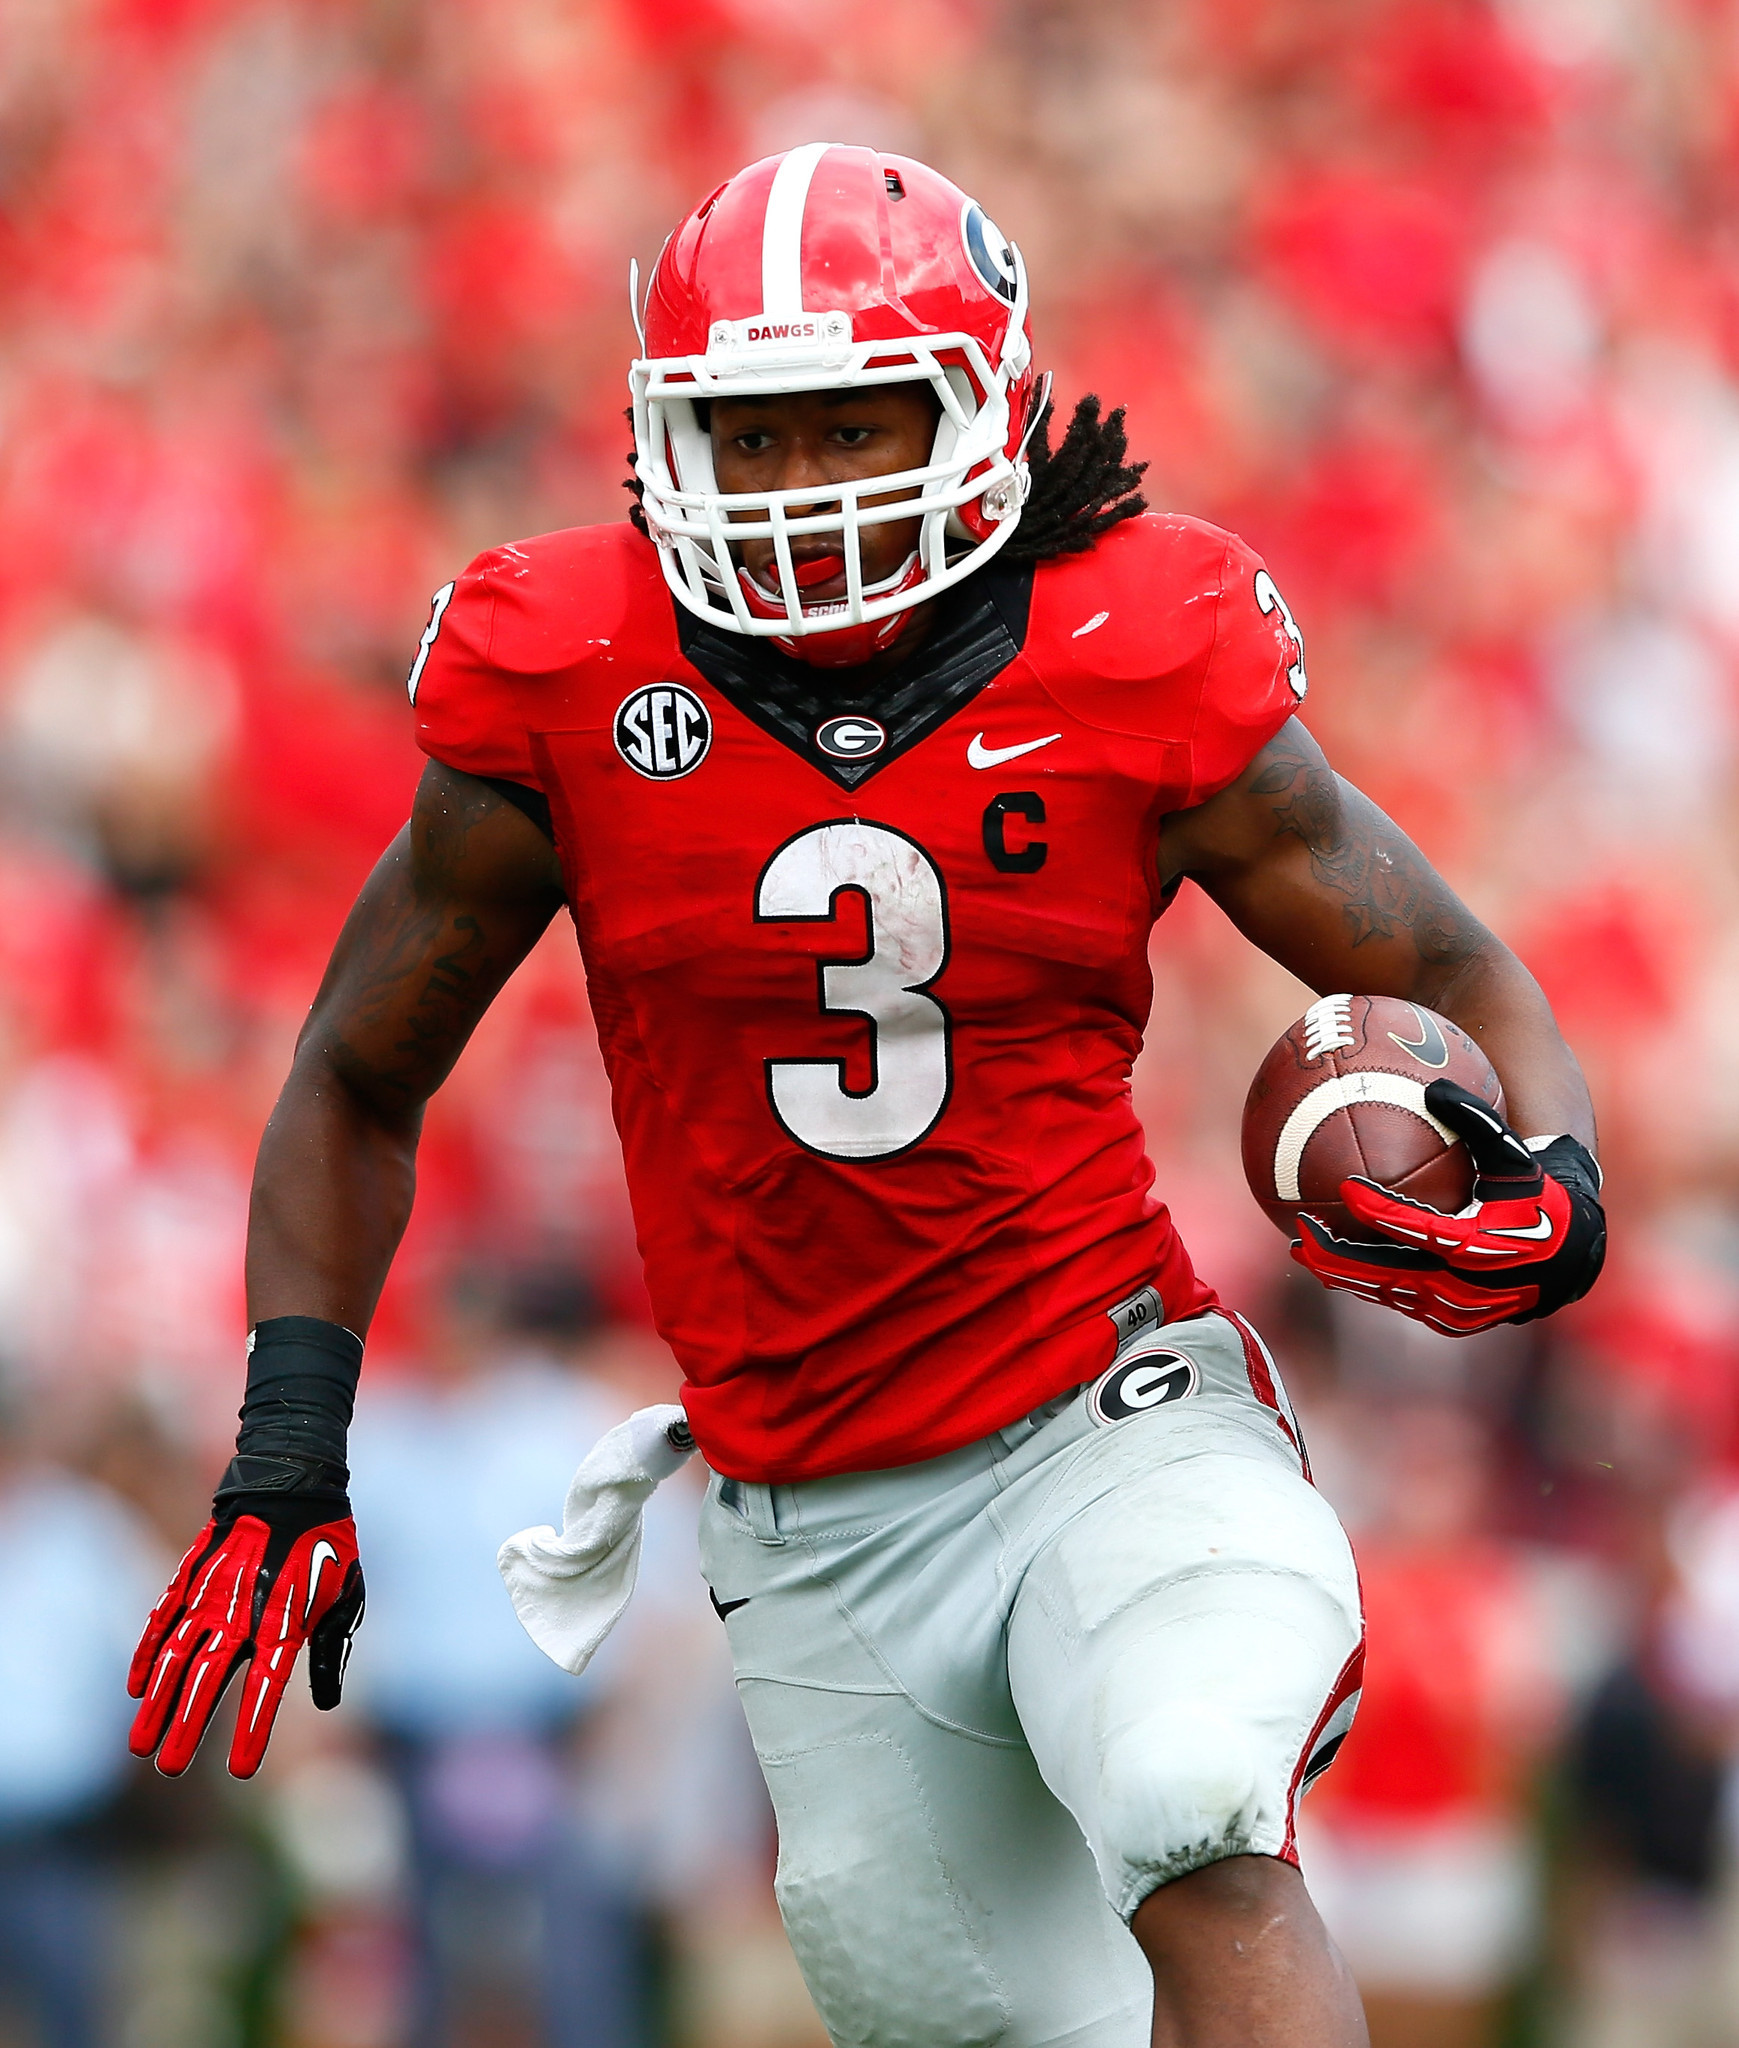 os-ed-letters-todd-gurley-ncaa-20141010-001